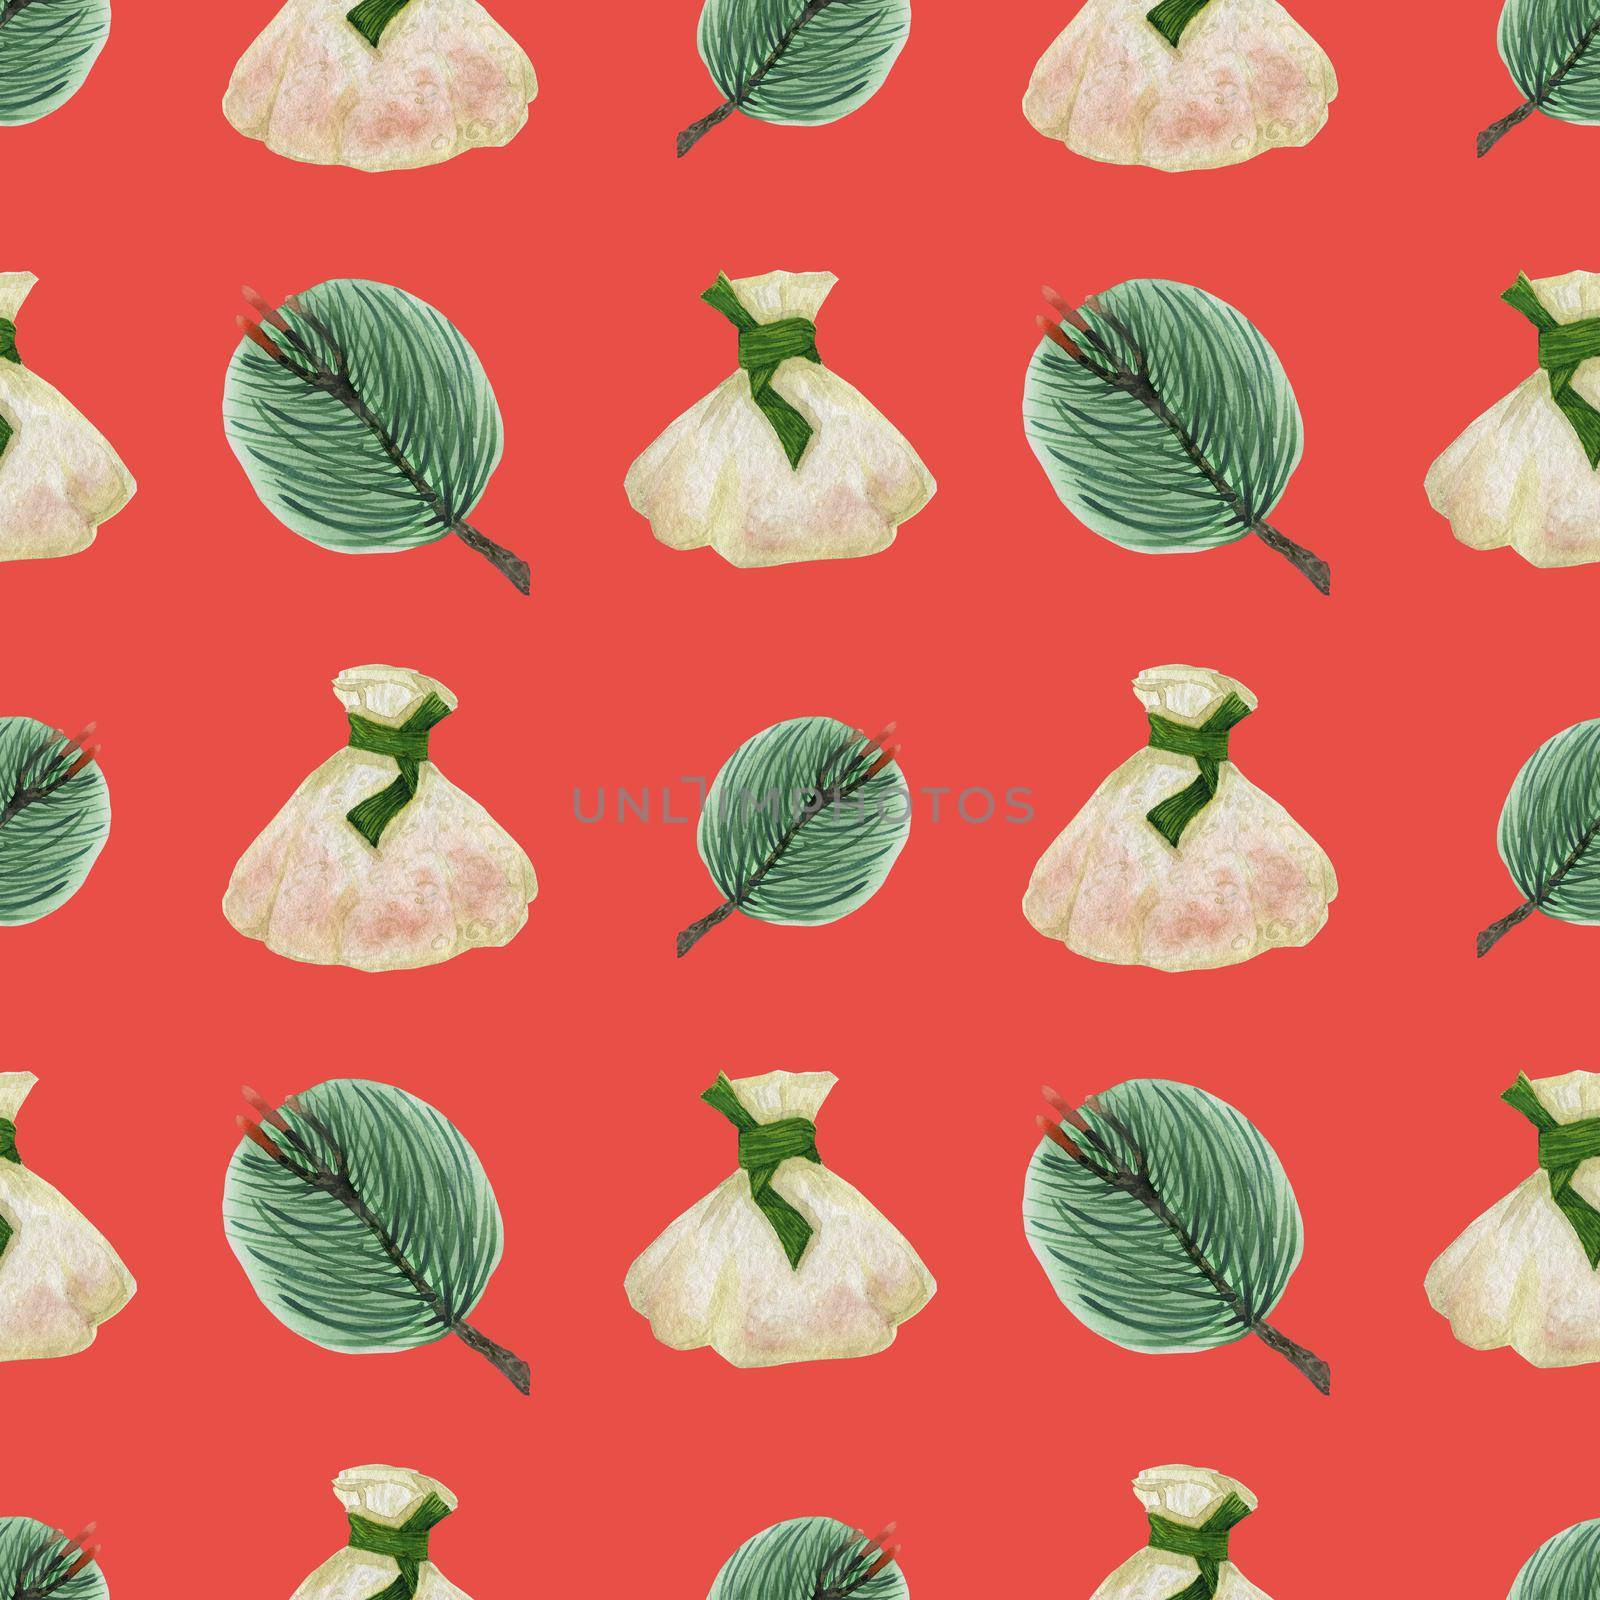 Chinese New Year watercolor seamless pattern. Steamed Dumplings and Pine Branches. Red coral background, clipping path included